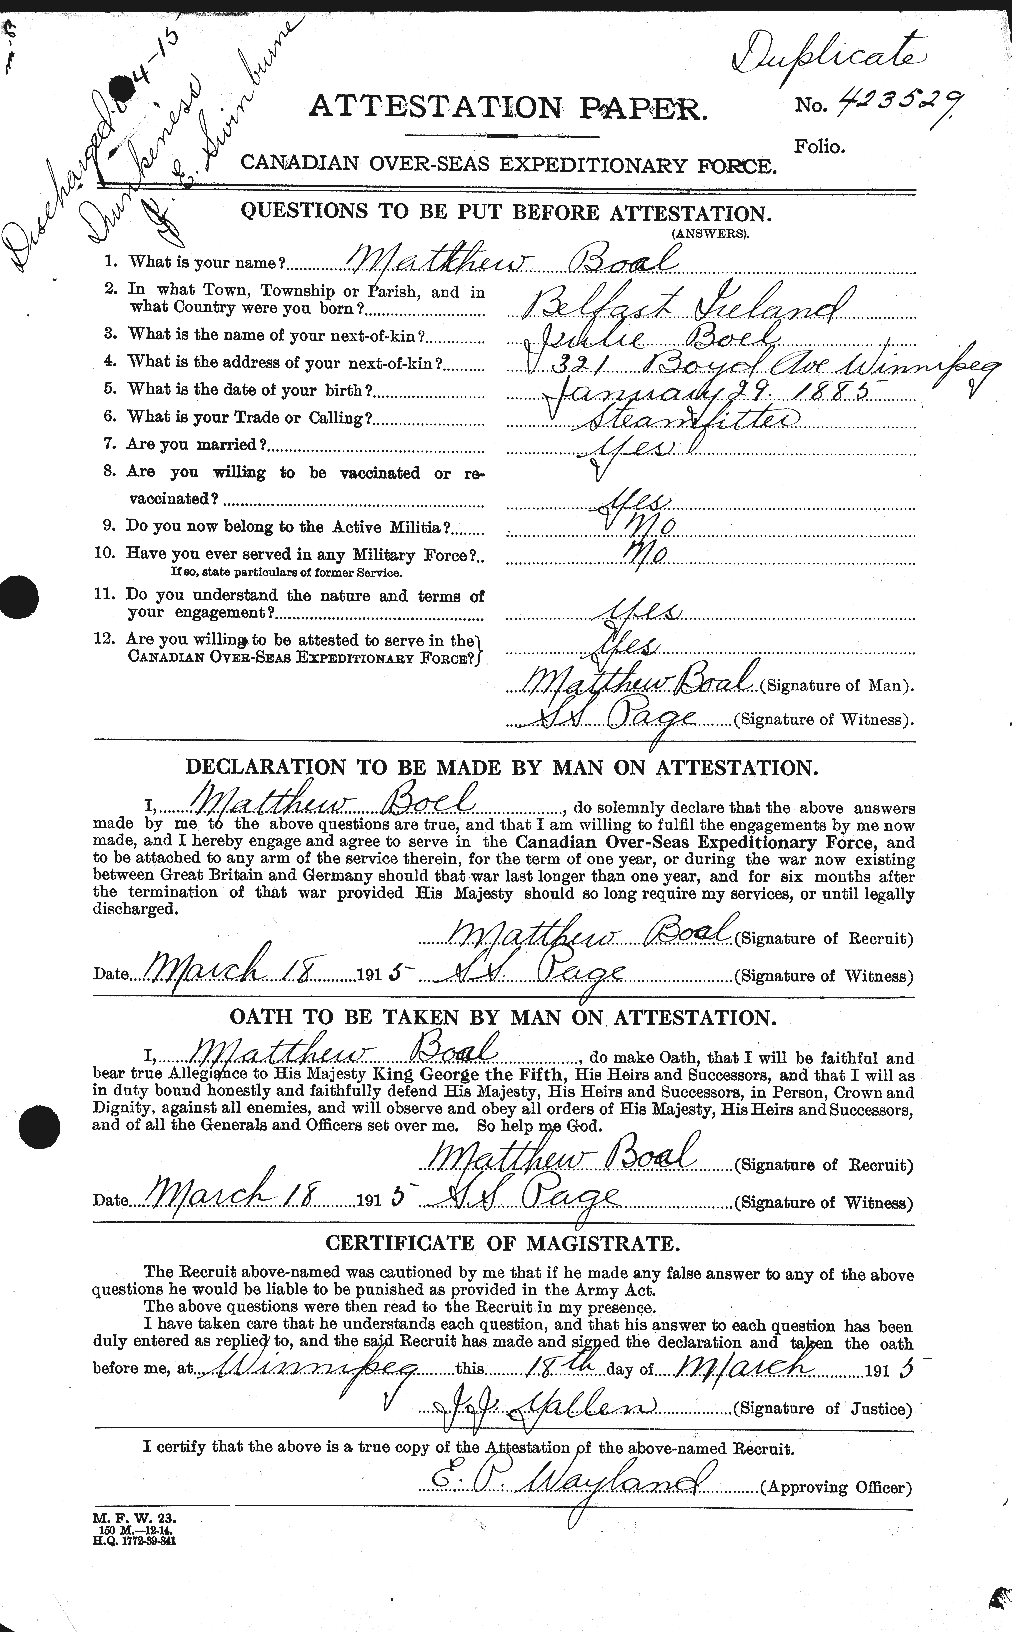 Personnel Records of the First World War - CEF 247301a